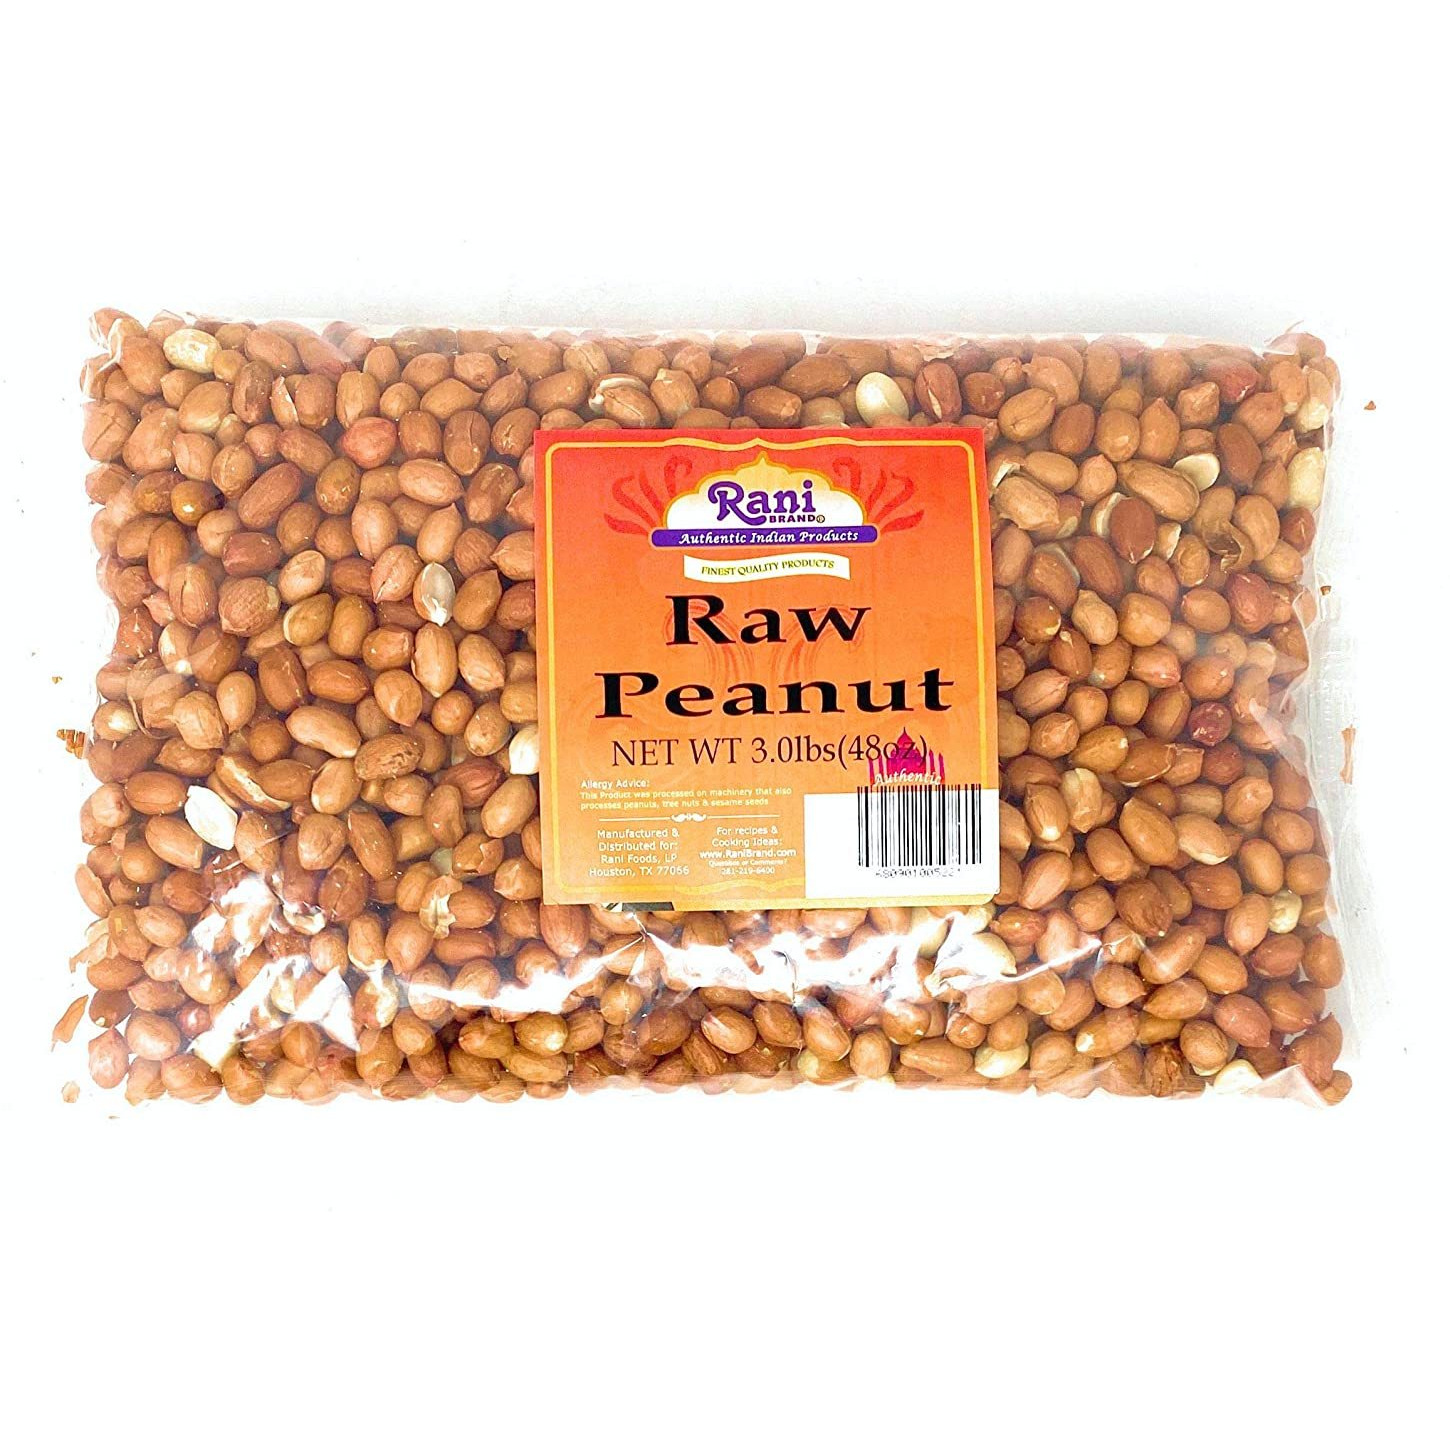 Rani Peanuts, Raw Whole With Skin (uncooked, unsalted) 48oz (3lb) Bulk ~ All Natural | Vegan | Gluten Free Ingredients | Fresh Product of USA ~ Spanish Grade Groundnut / Redskin